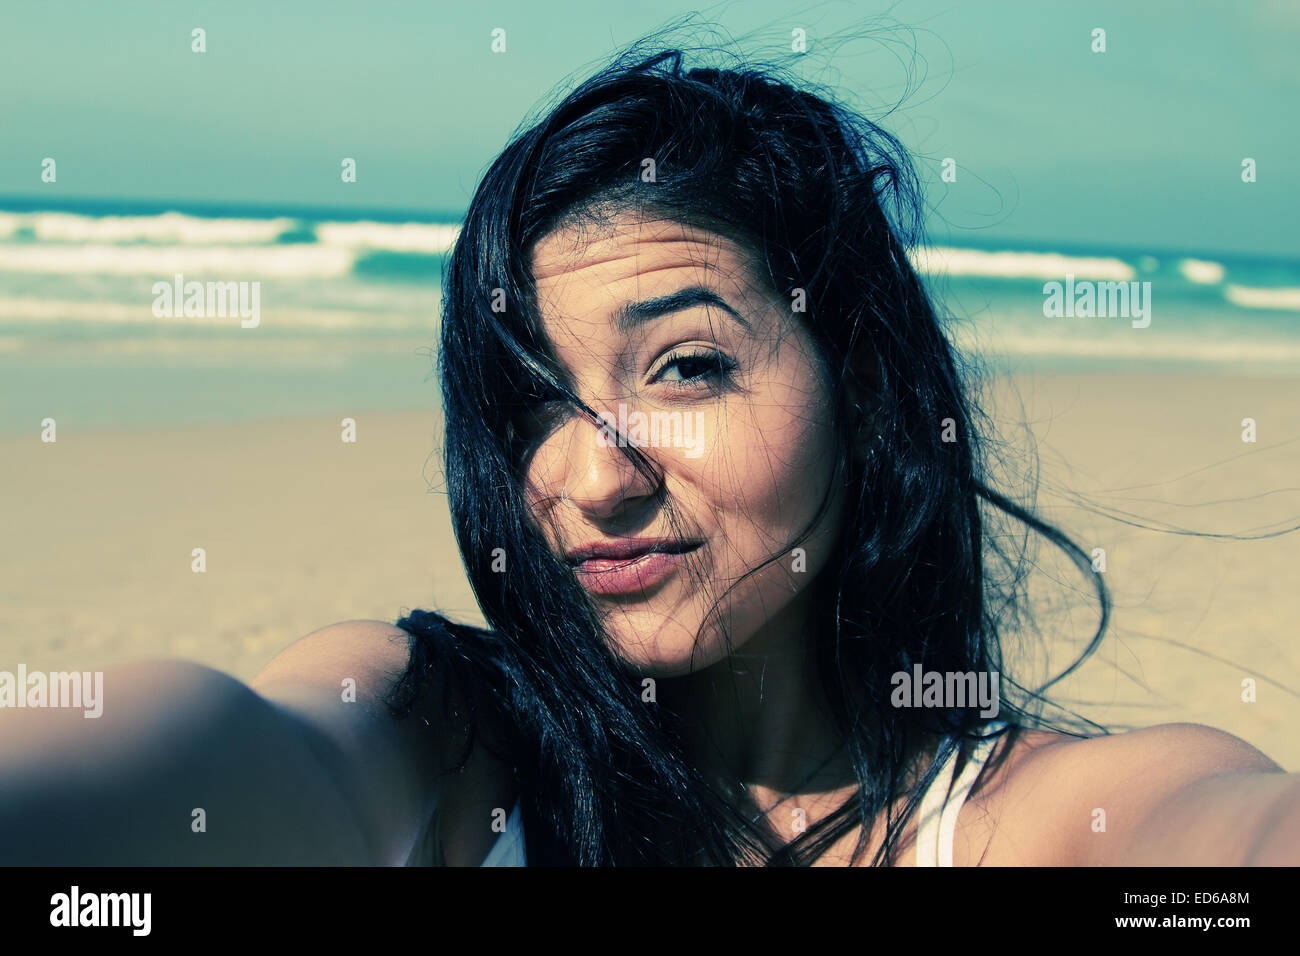 Beautiful girl smiling on the beach with the sand, sea and blue sky in the background. Selfie. Stock Photo